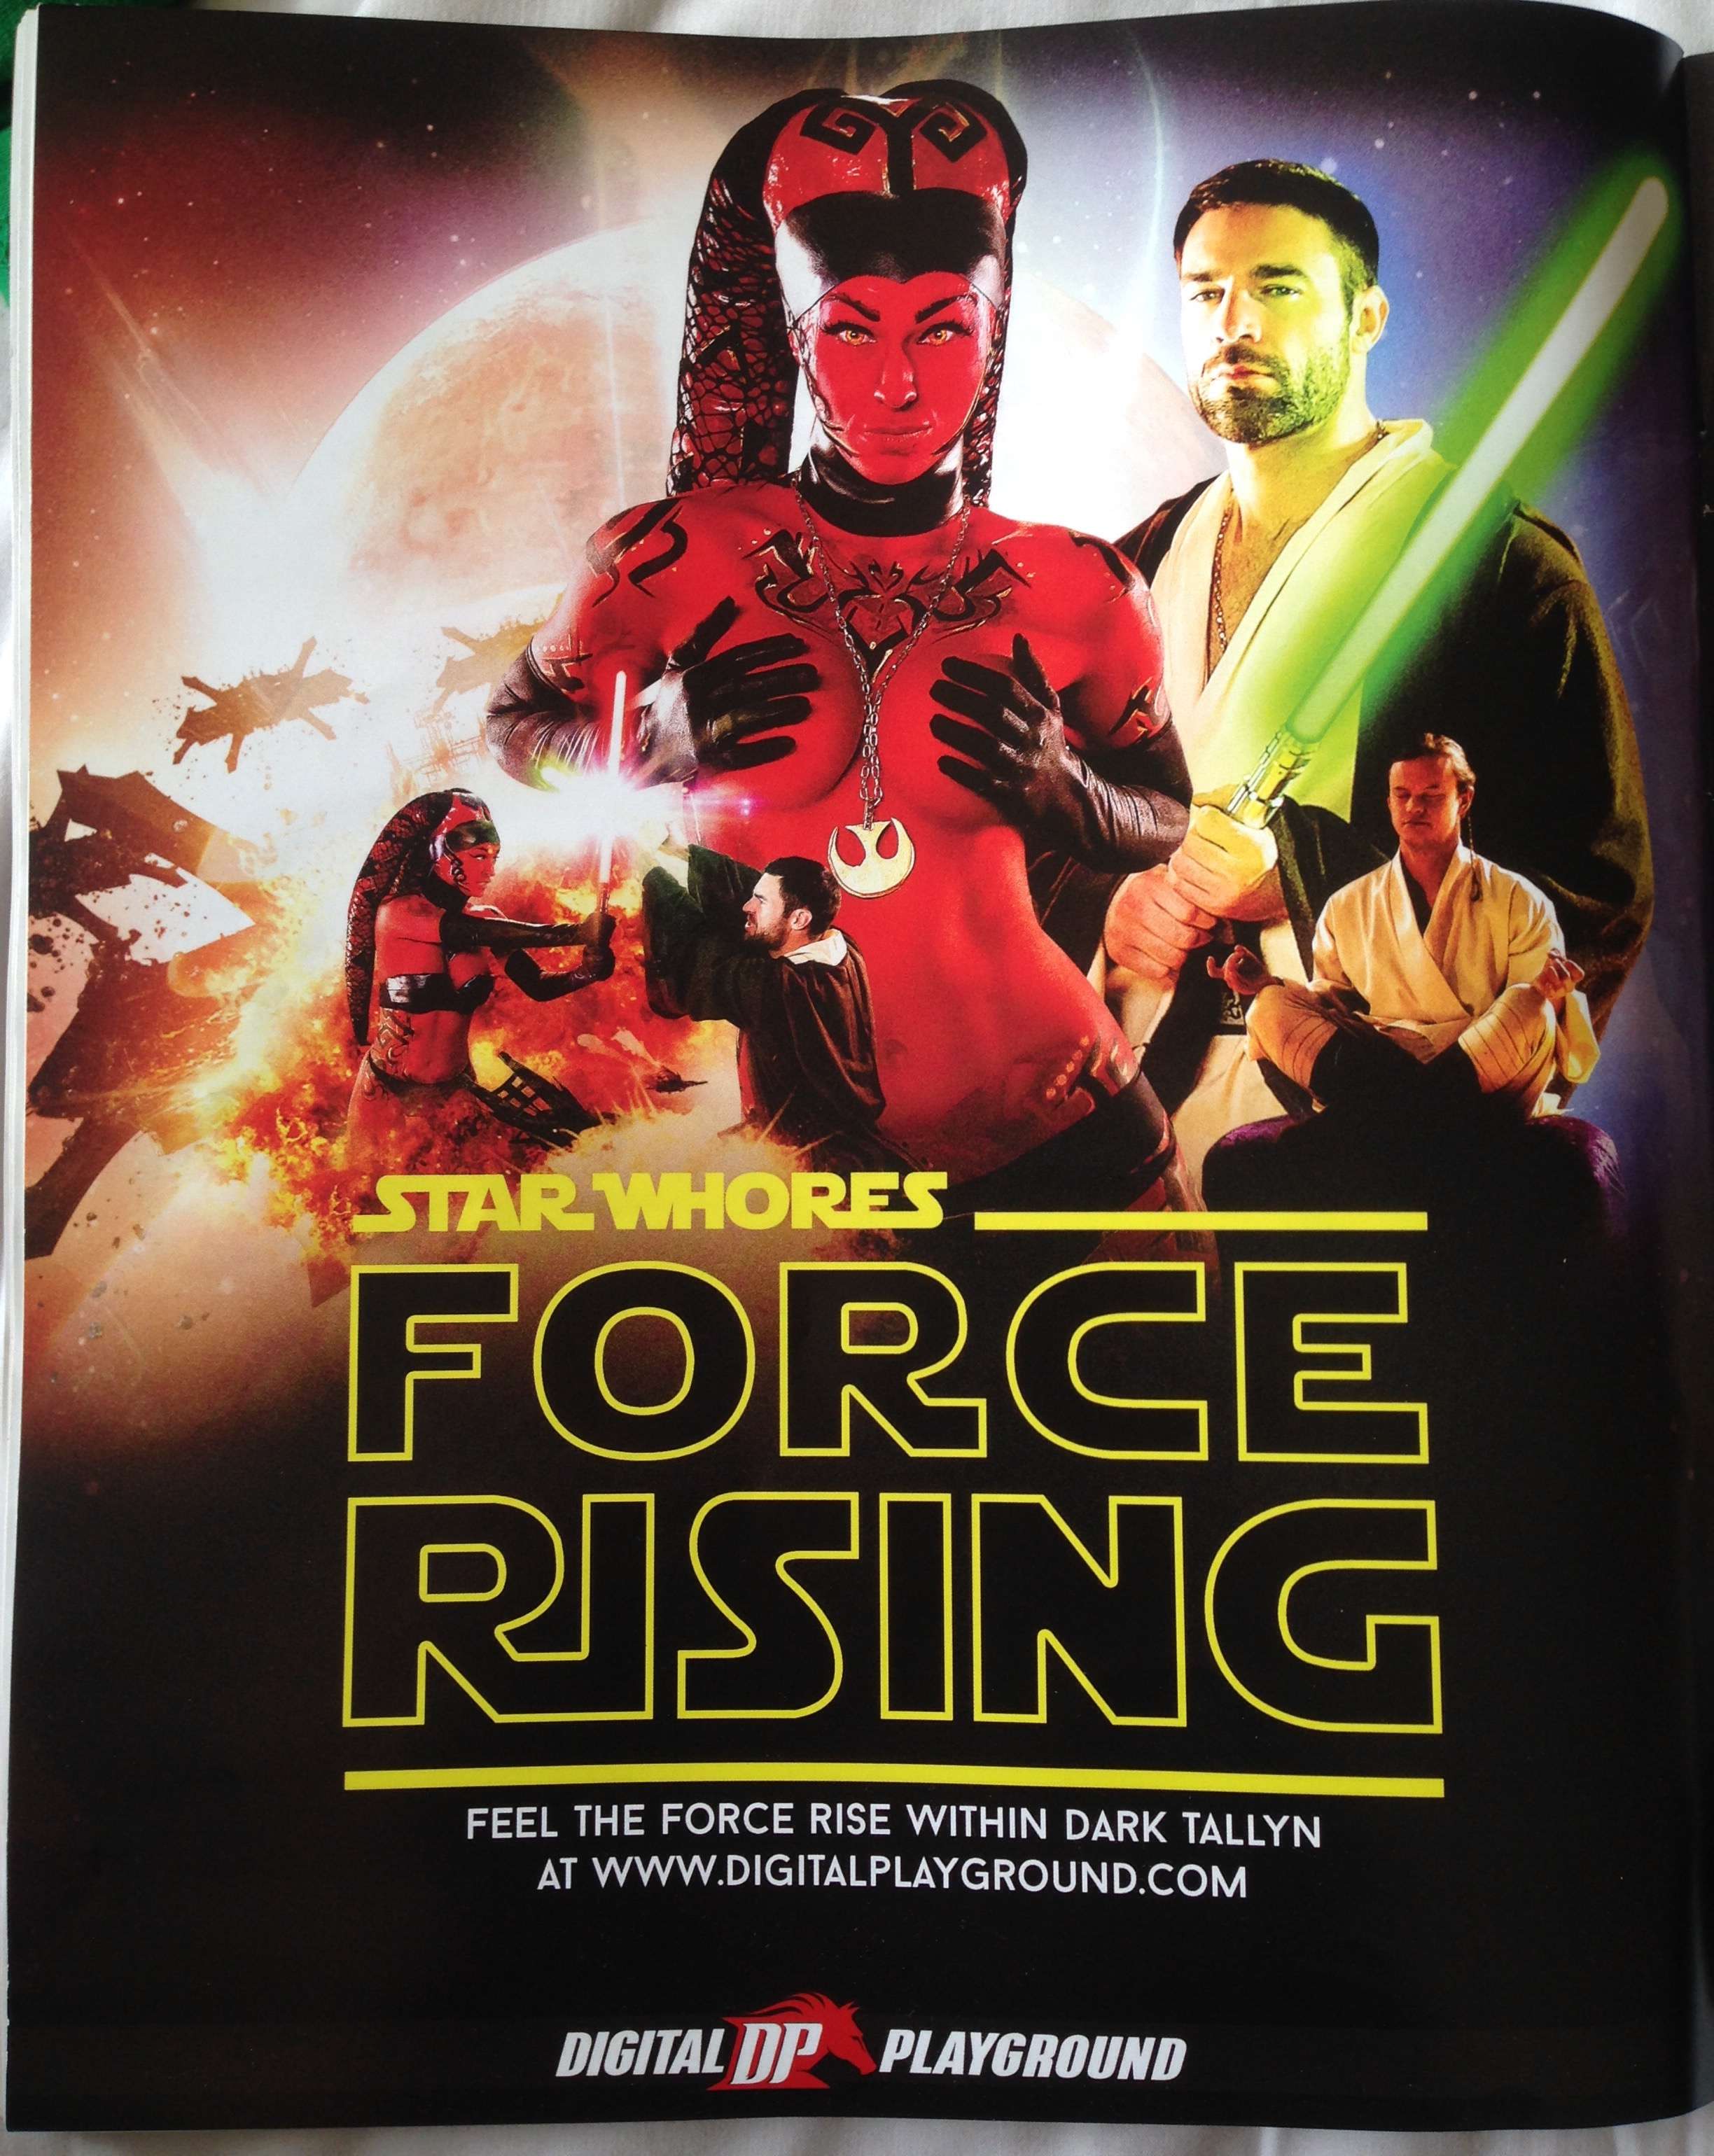 bonnie hedges recommends digitalplayground force rising pic